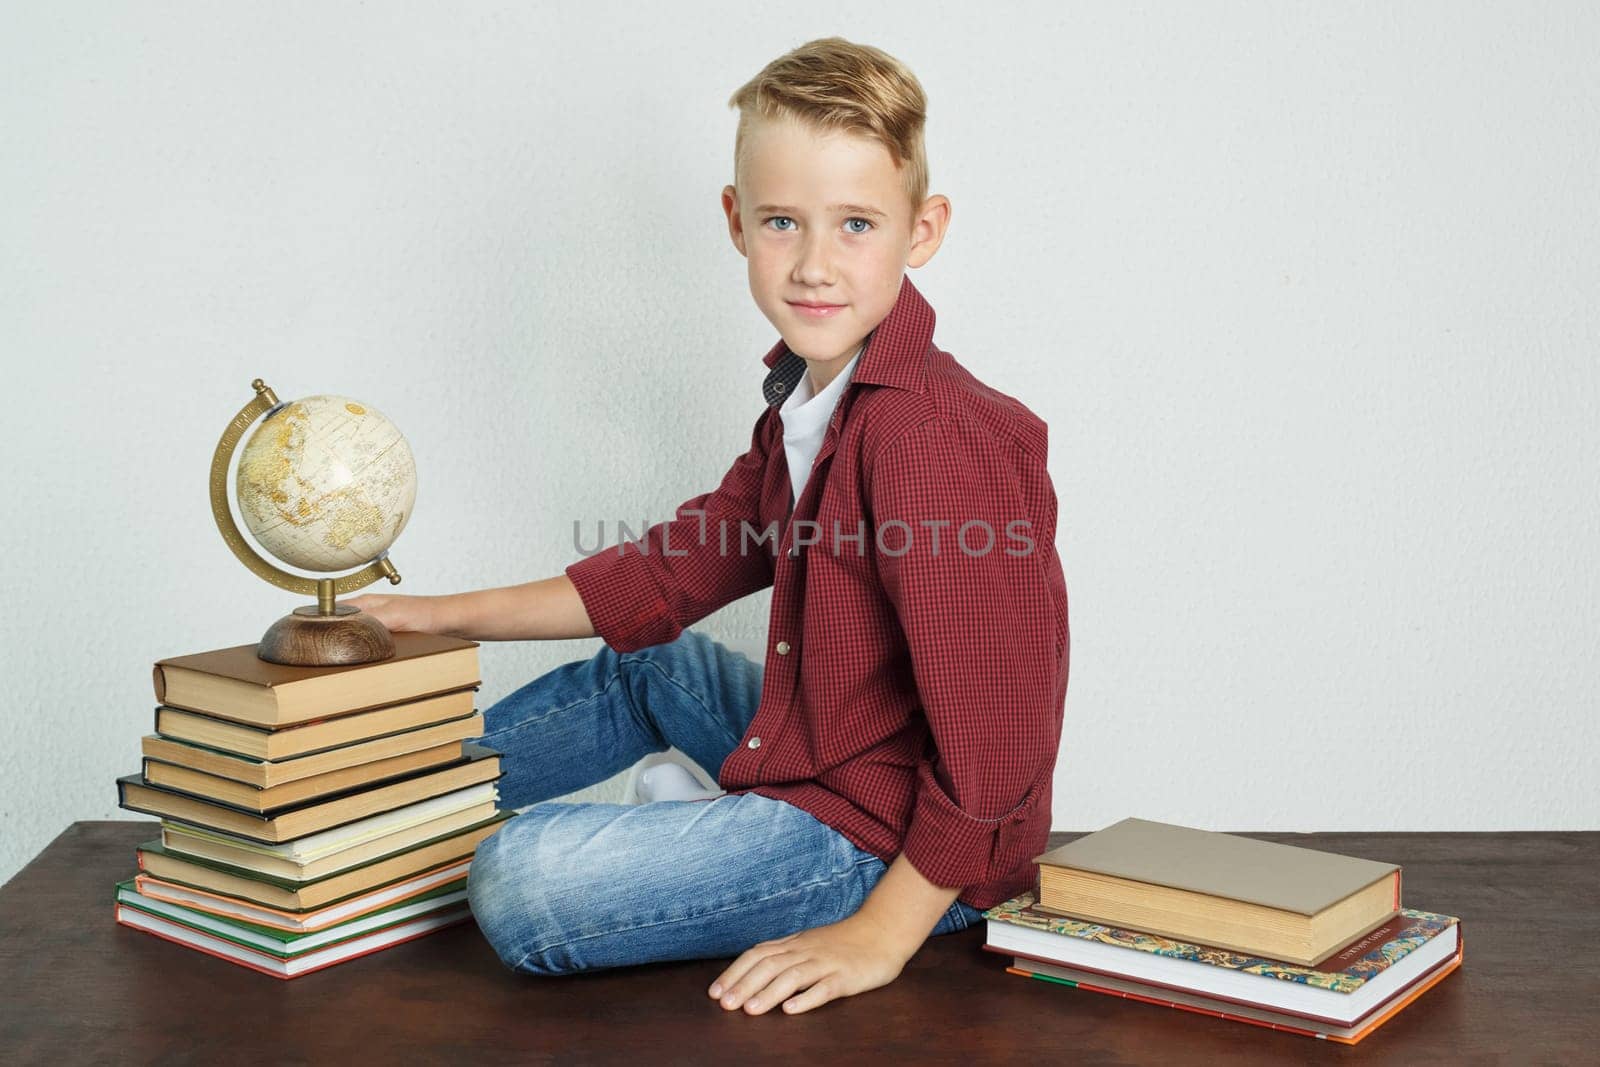 A schoolboy sits at a desk near books and holds a globe with his hand. Education concept